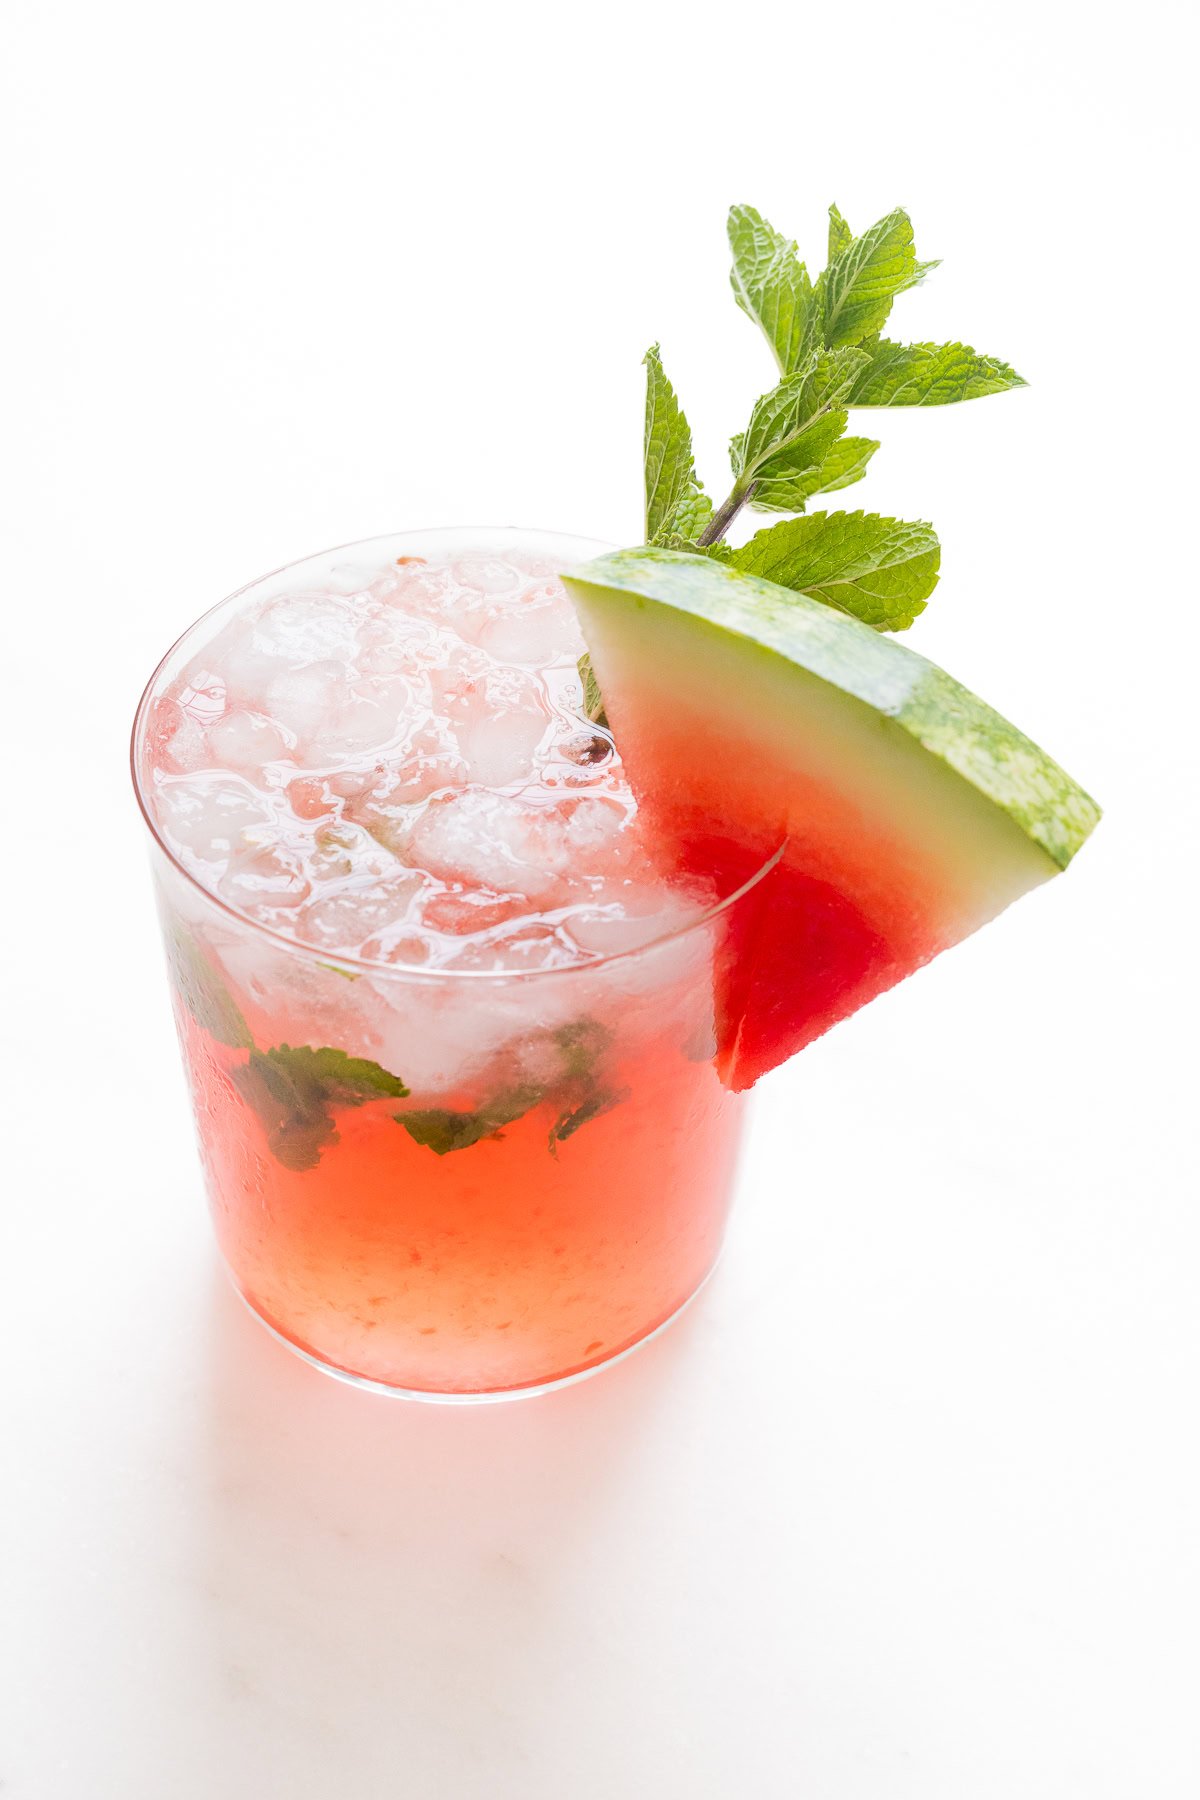 A refreshing watermelon mojito garnished with a slice of watermelon and fresh mint leaves in a clear glass.